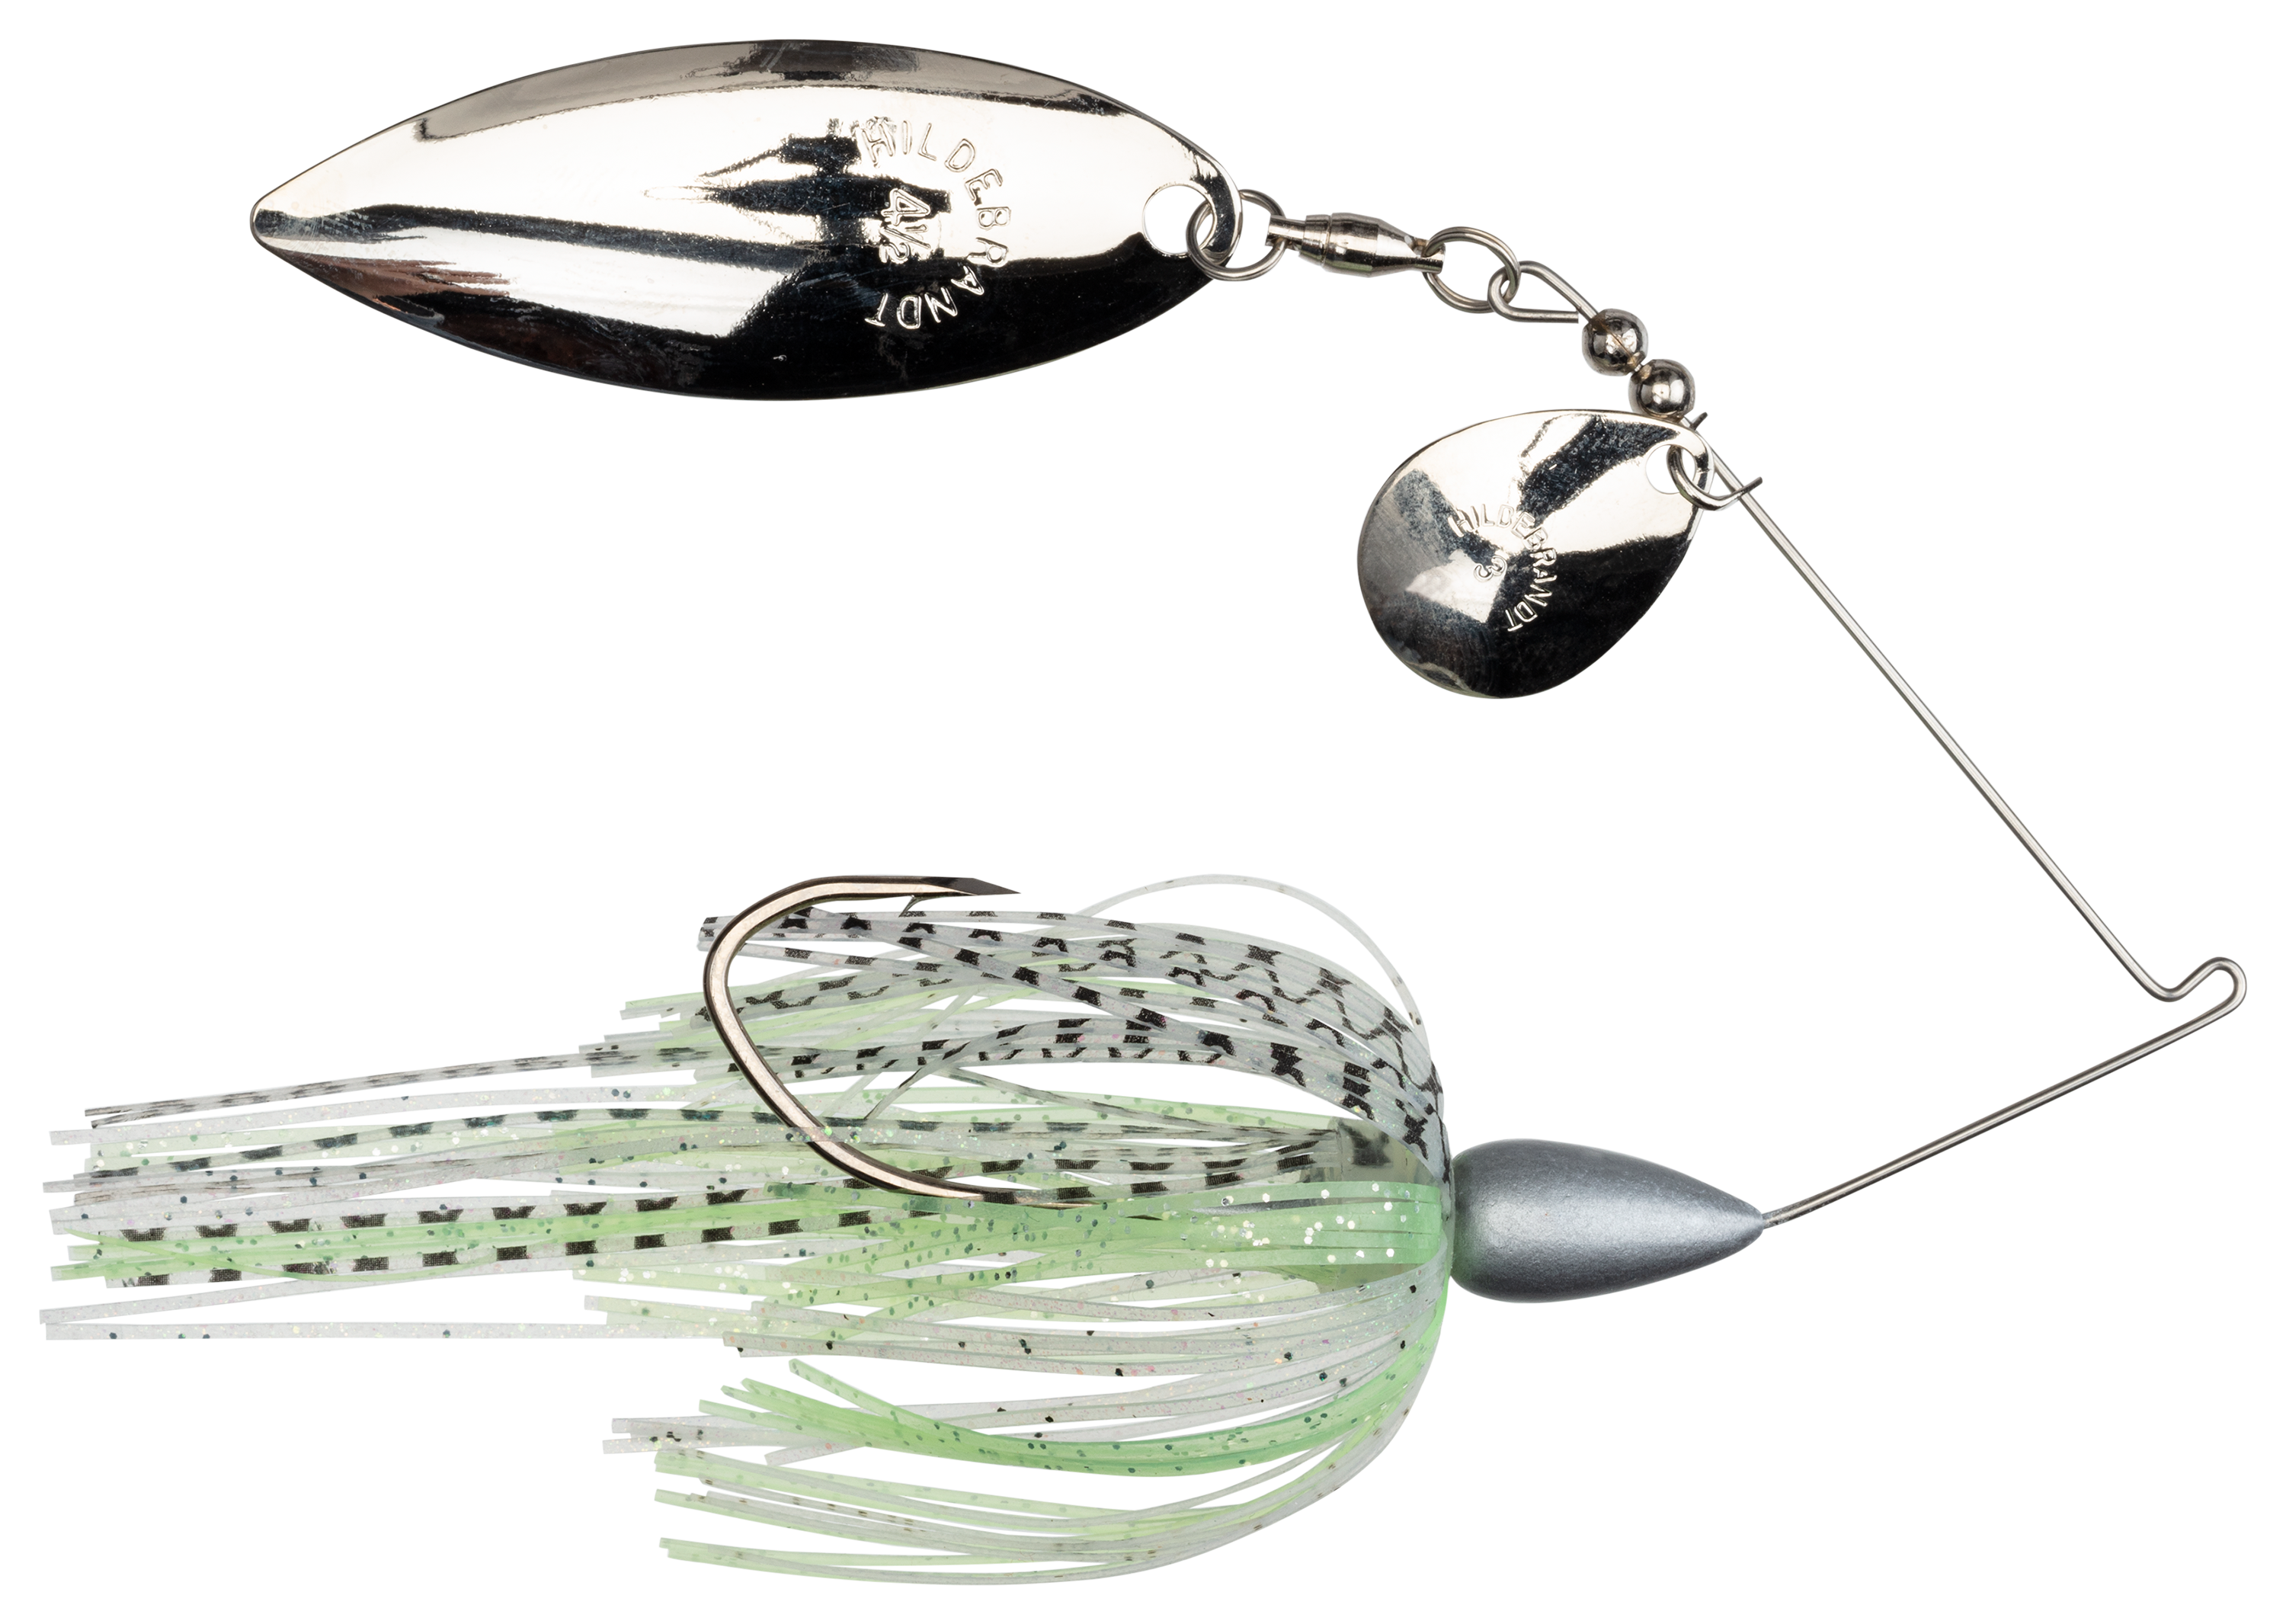 Bass Pro Shops XPS All-American Tandem Spinnerbait - Spot Remover - 3/4 oz